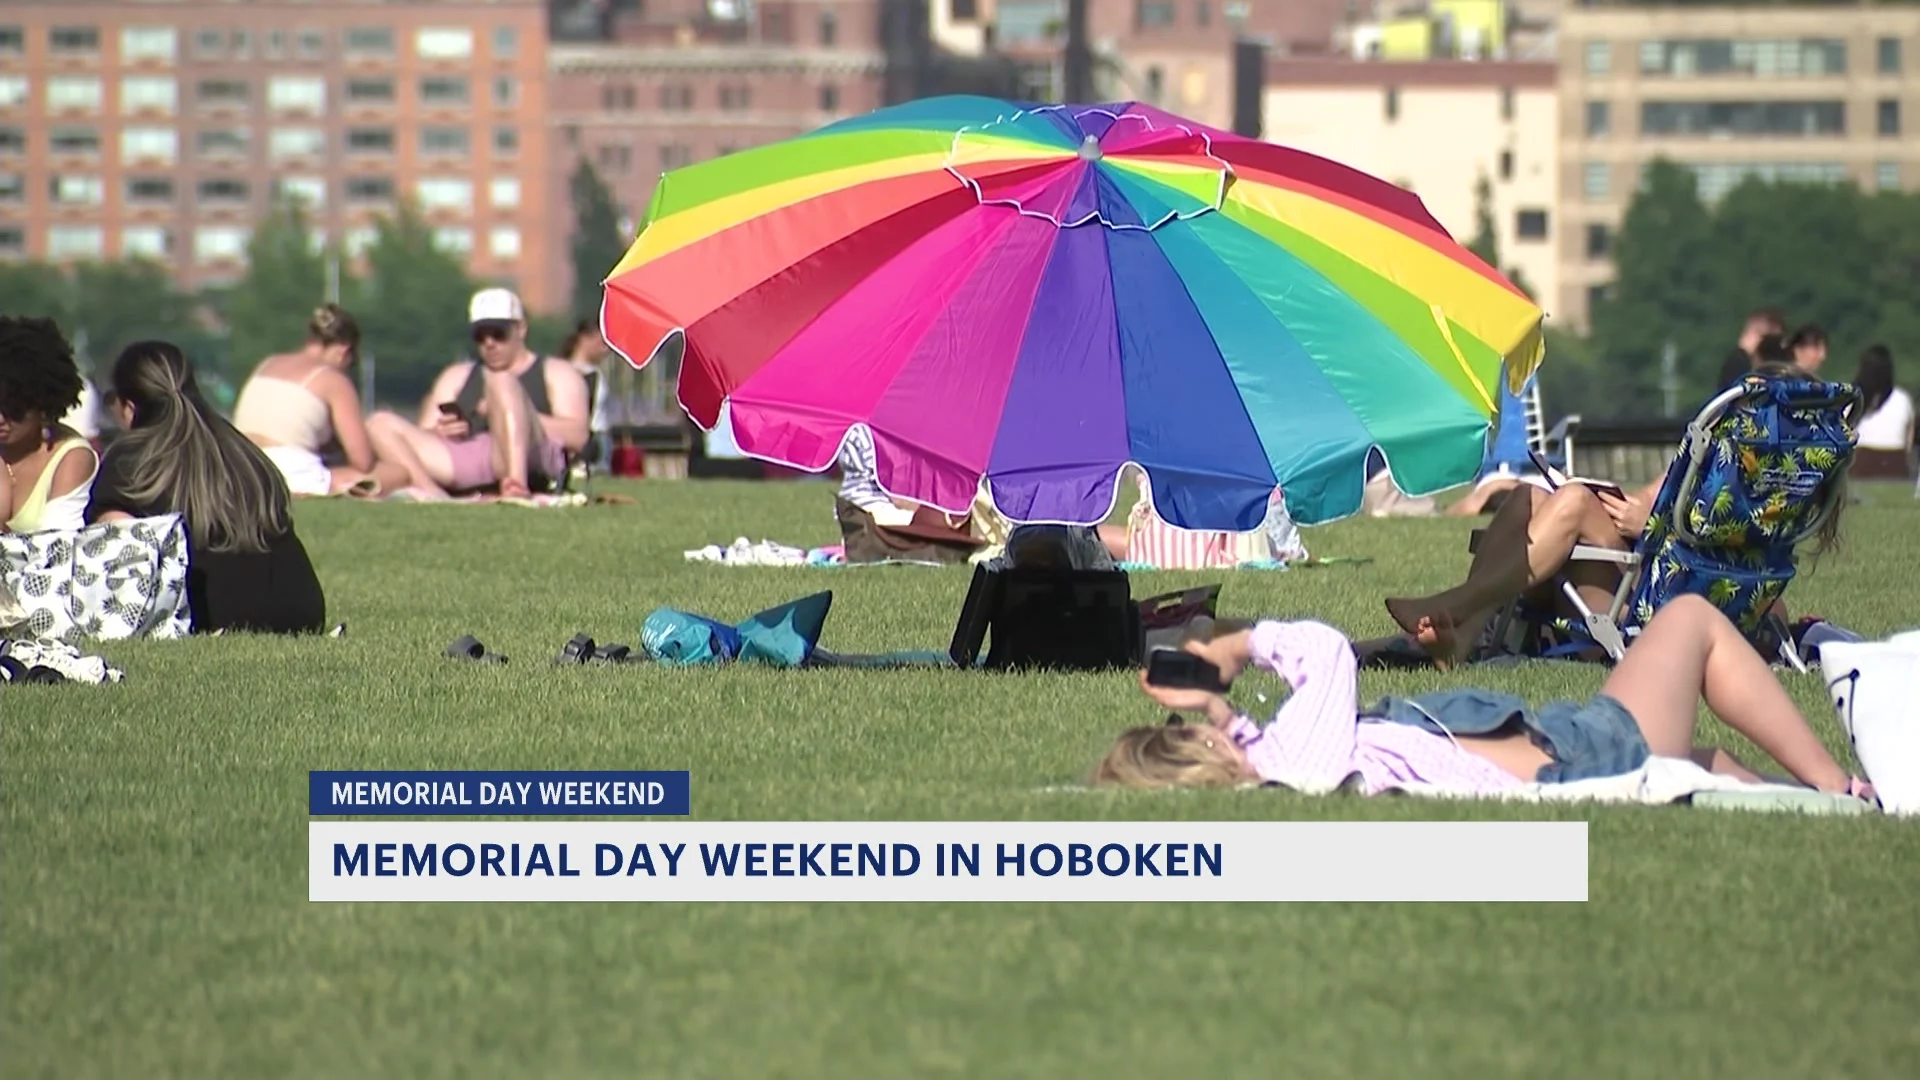 Hoboken in New Jersey marks Memorial Day weekend with celebrations